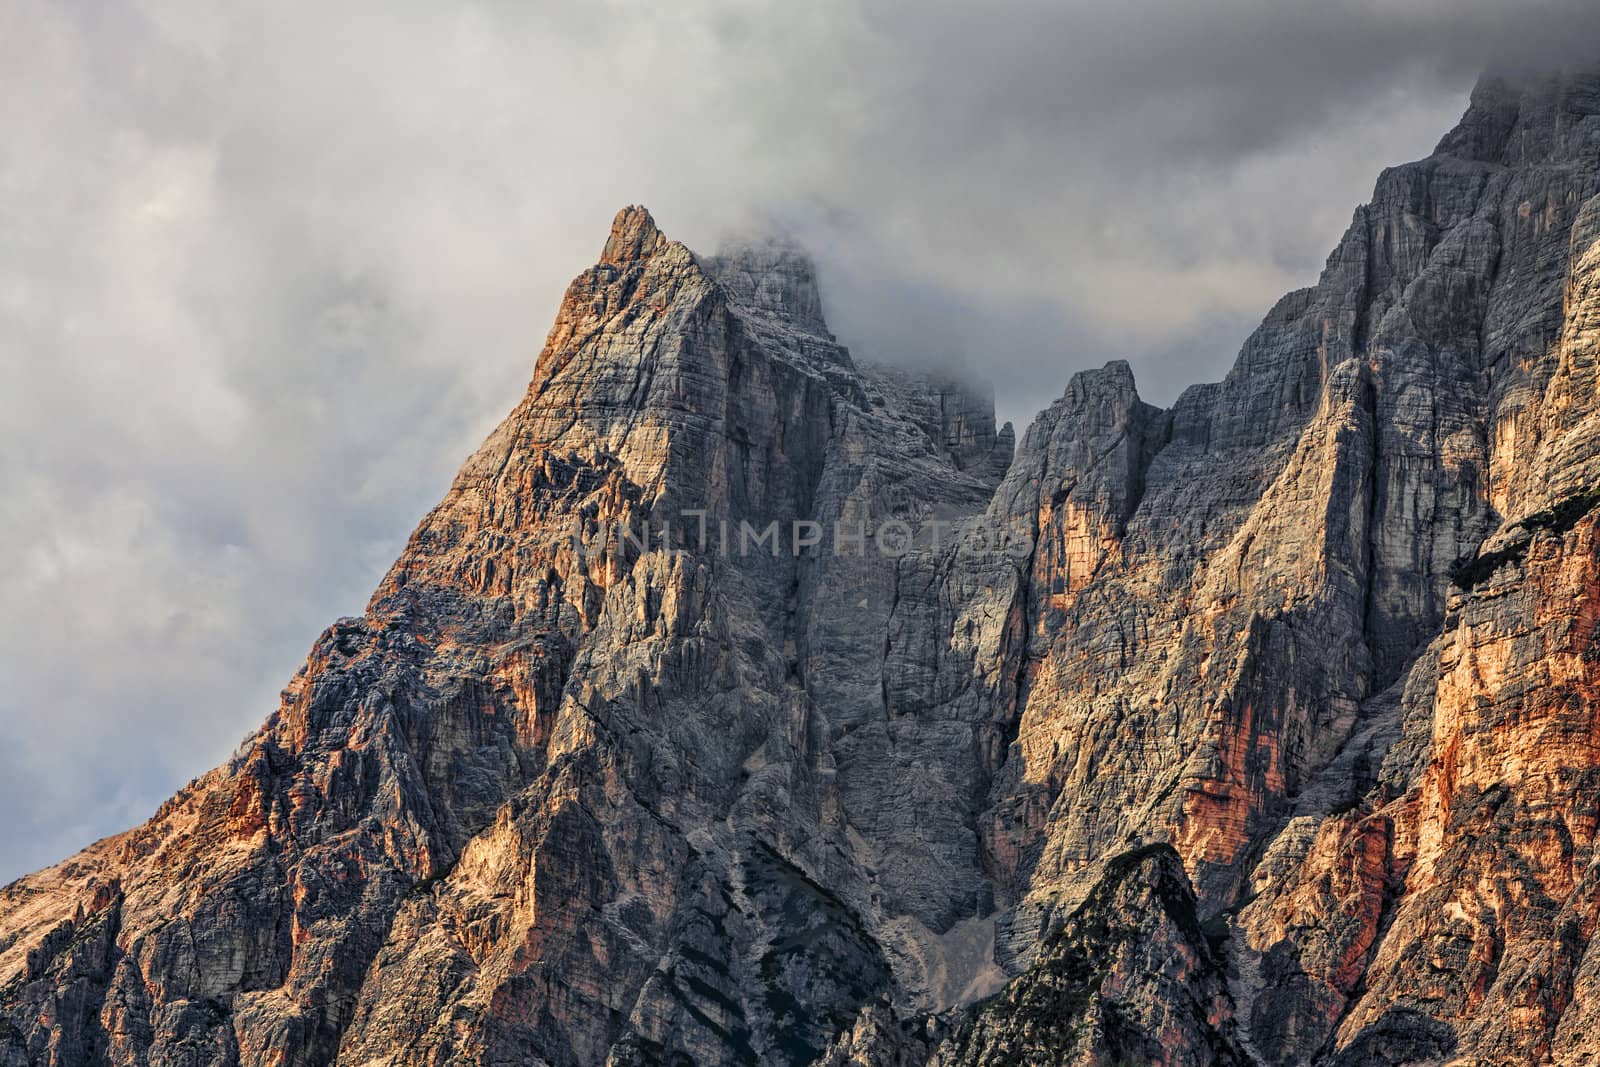 High altitude peaks and clouds in Dolomites Mountains in Italy.